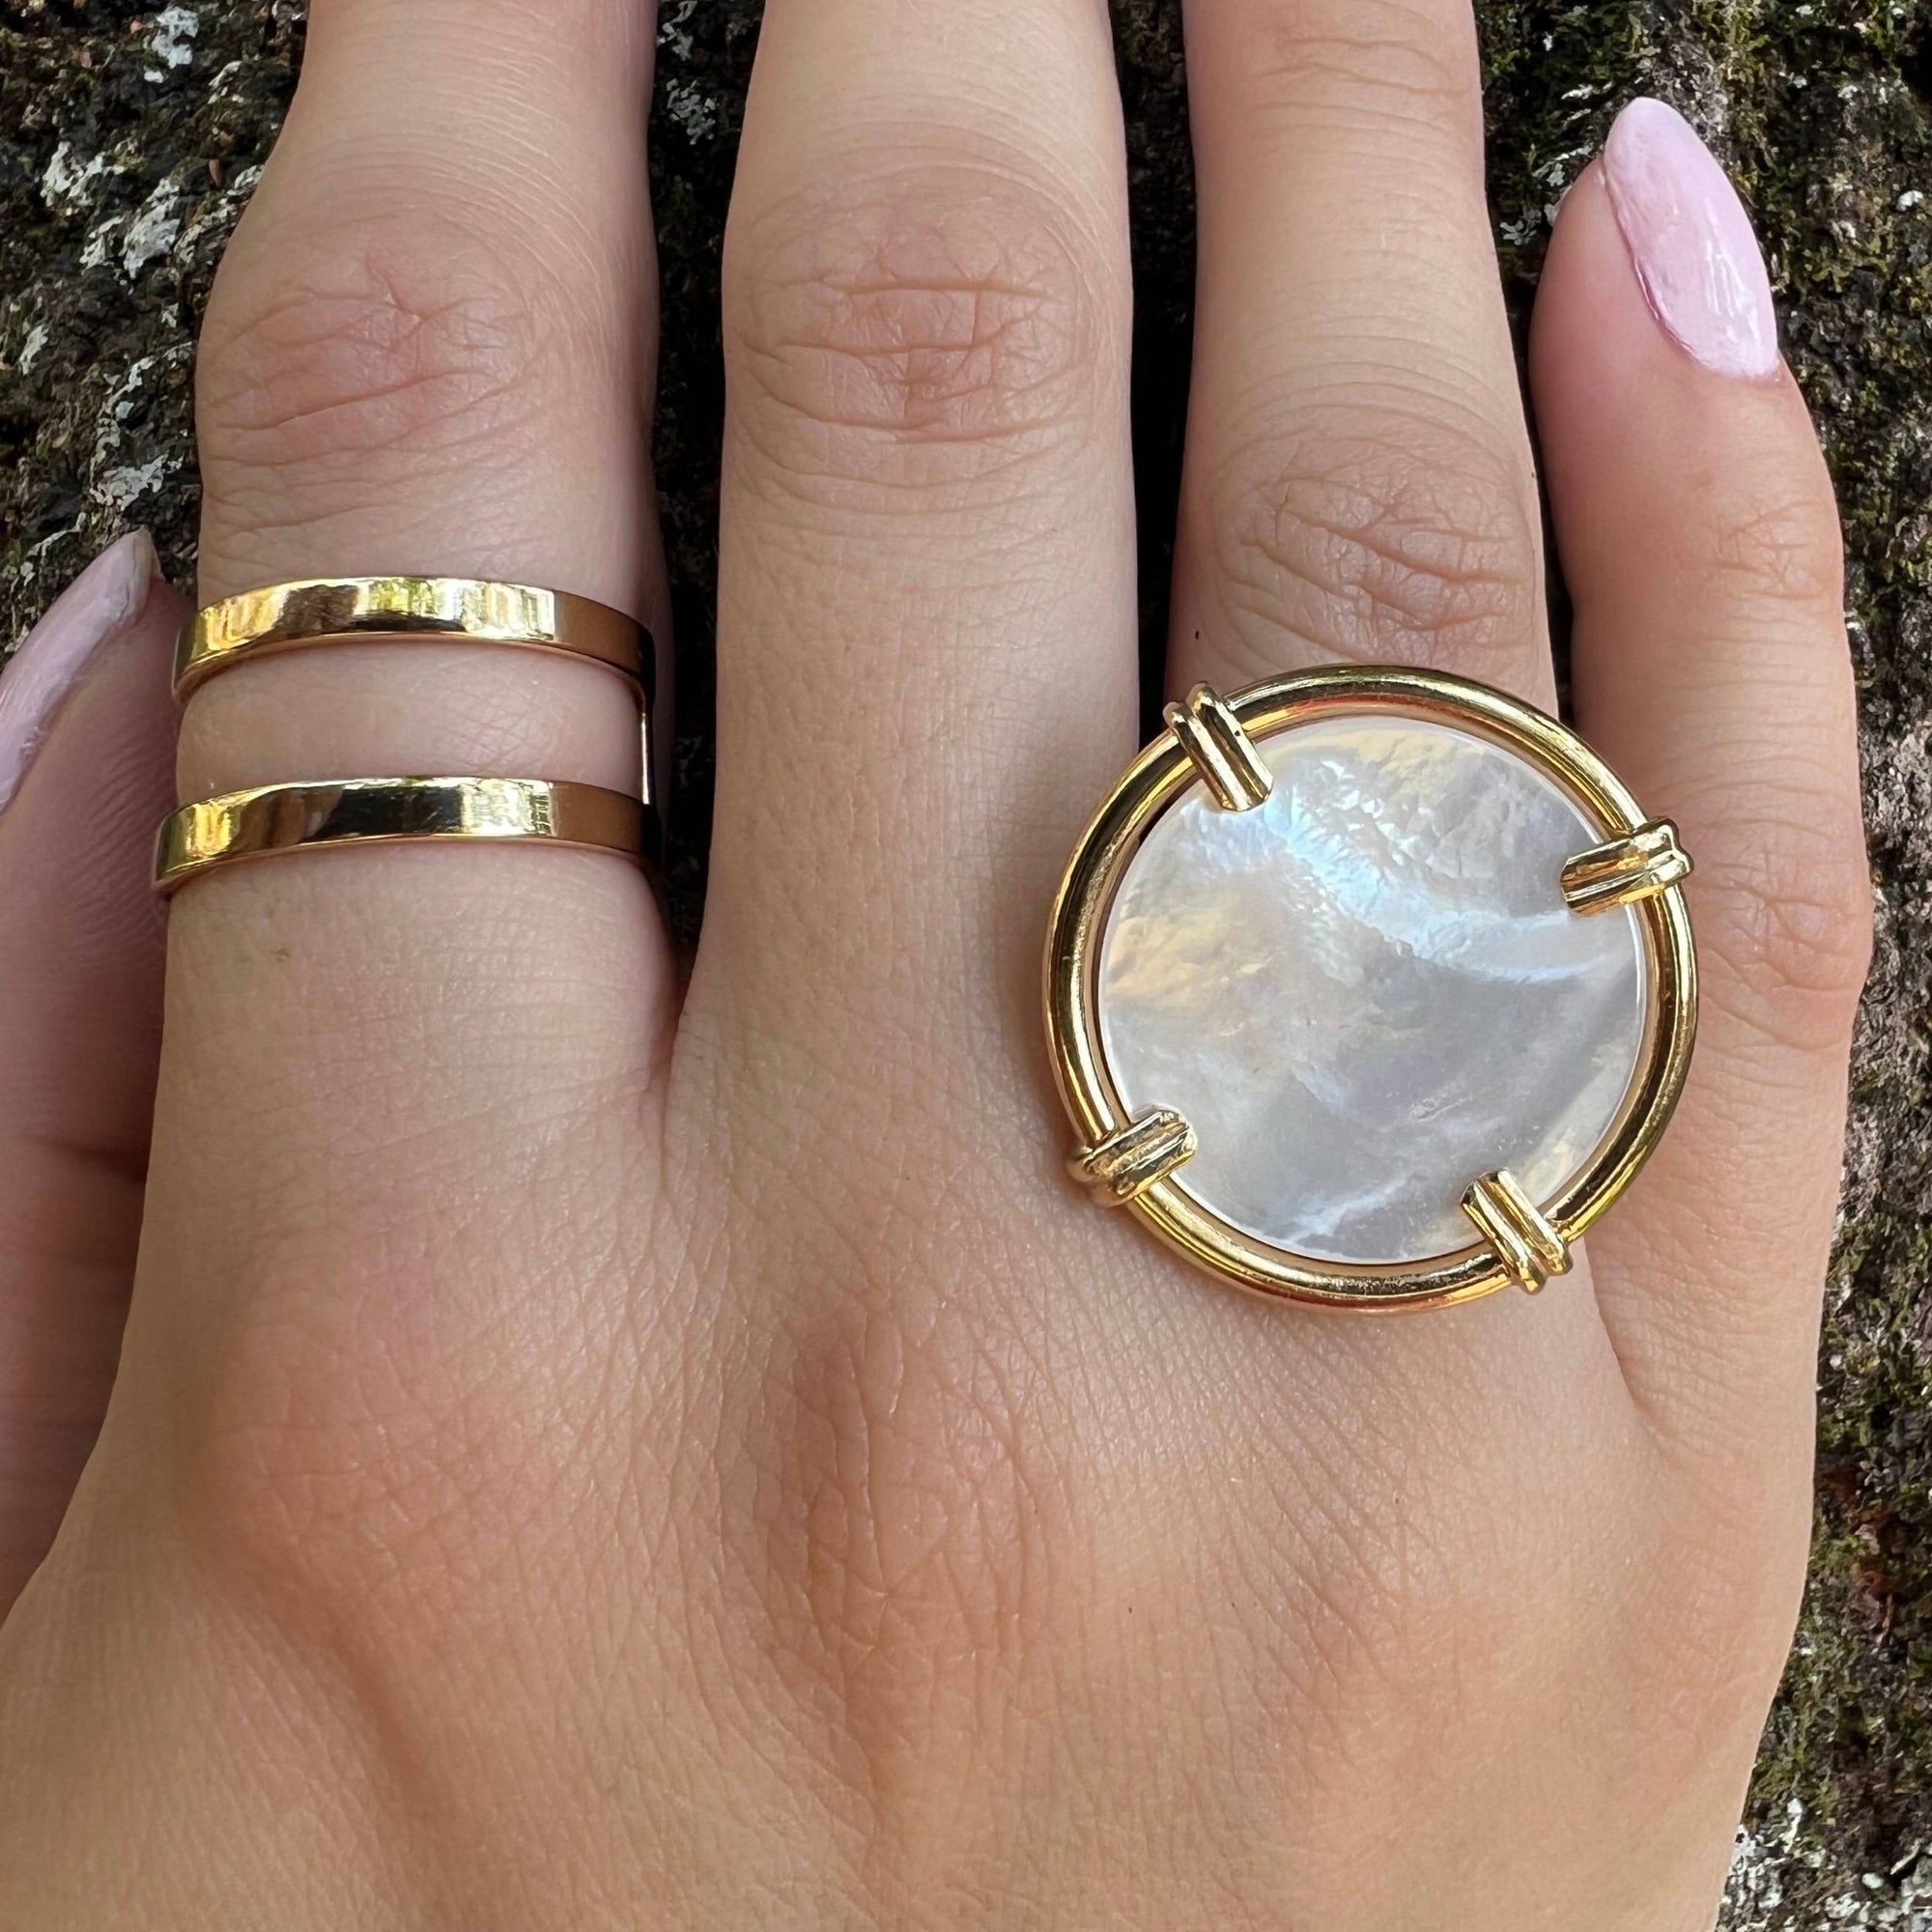 Alchemia Mother of Pearl Prong Adjustable Ring - Large | Charles Albert Jewelry